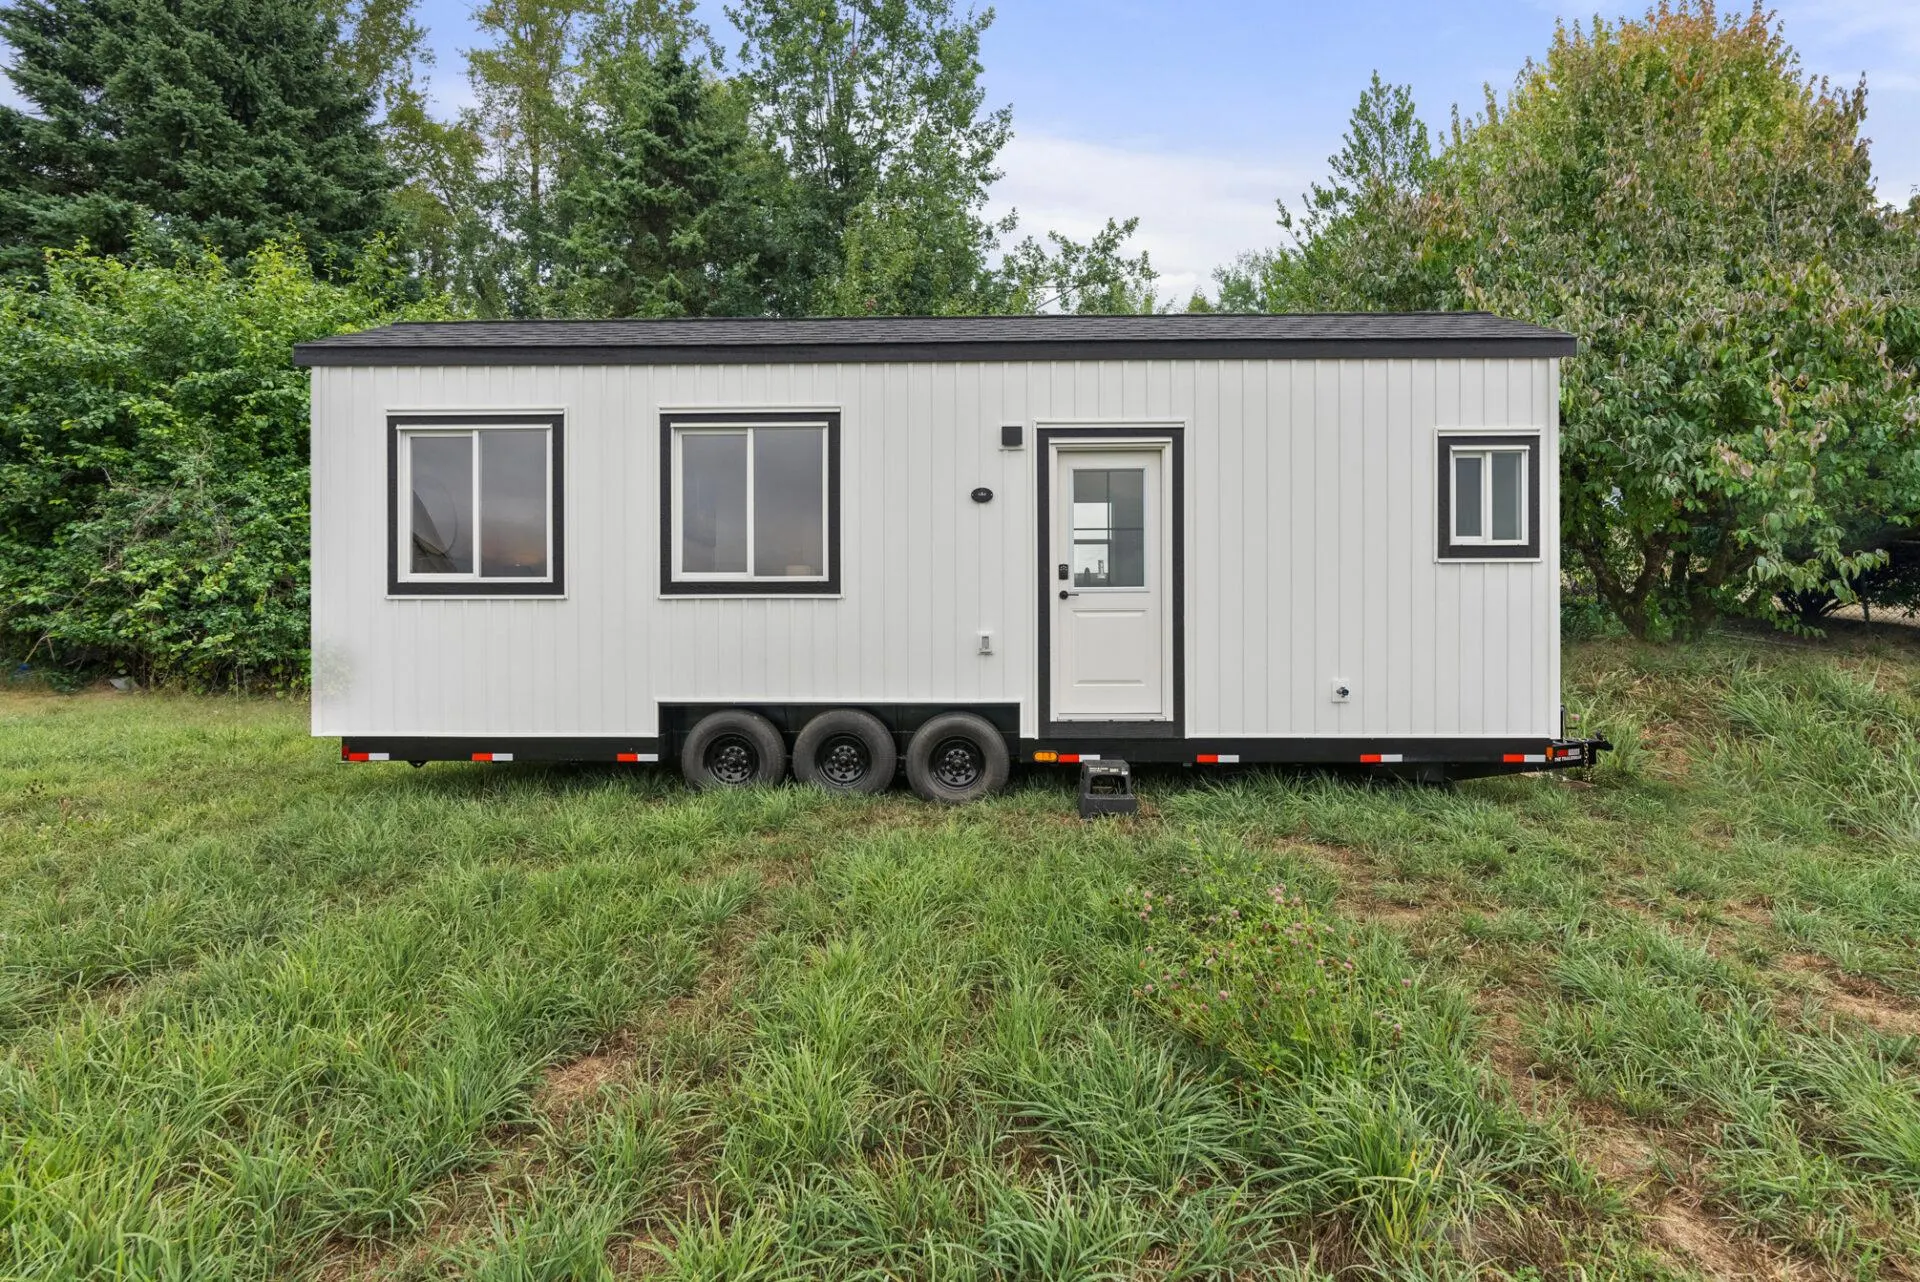 Exterior View - Denman by Rover Tiny Homes